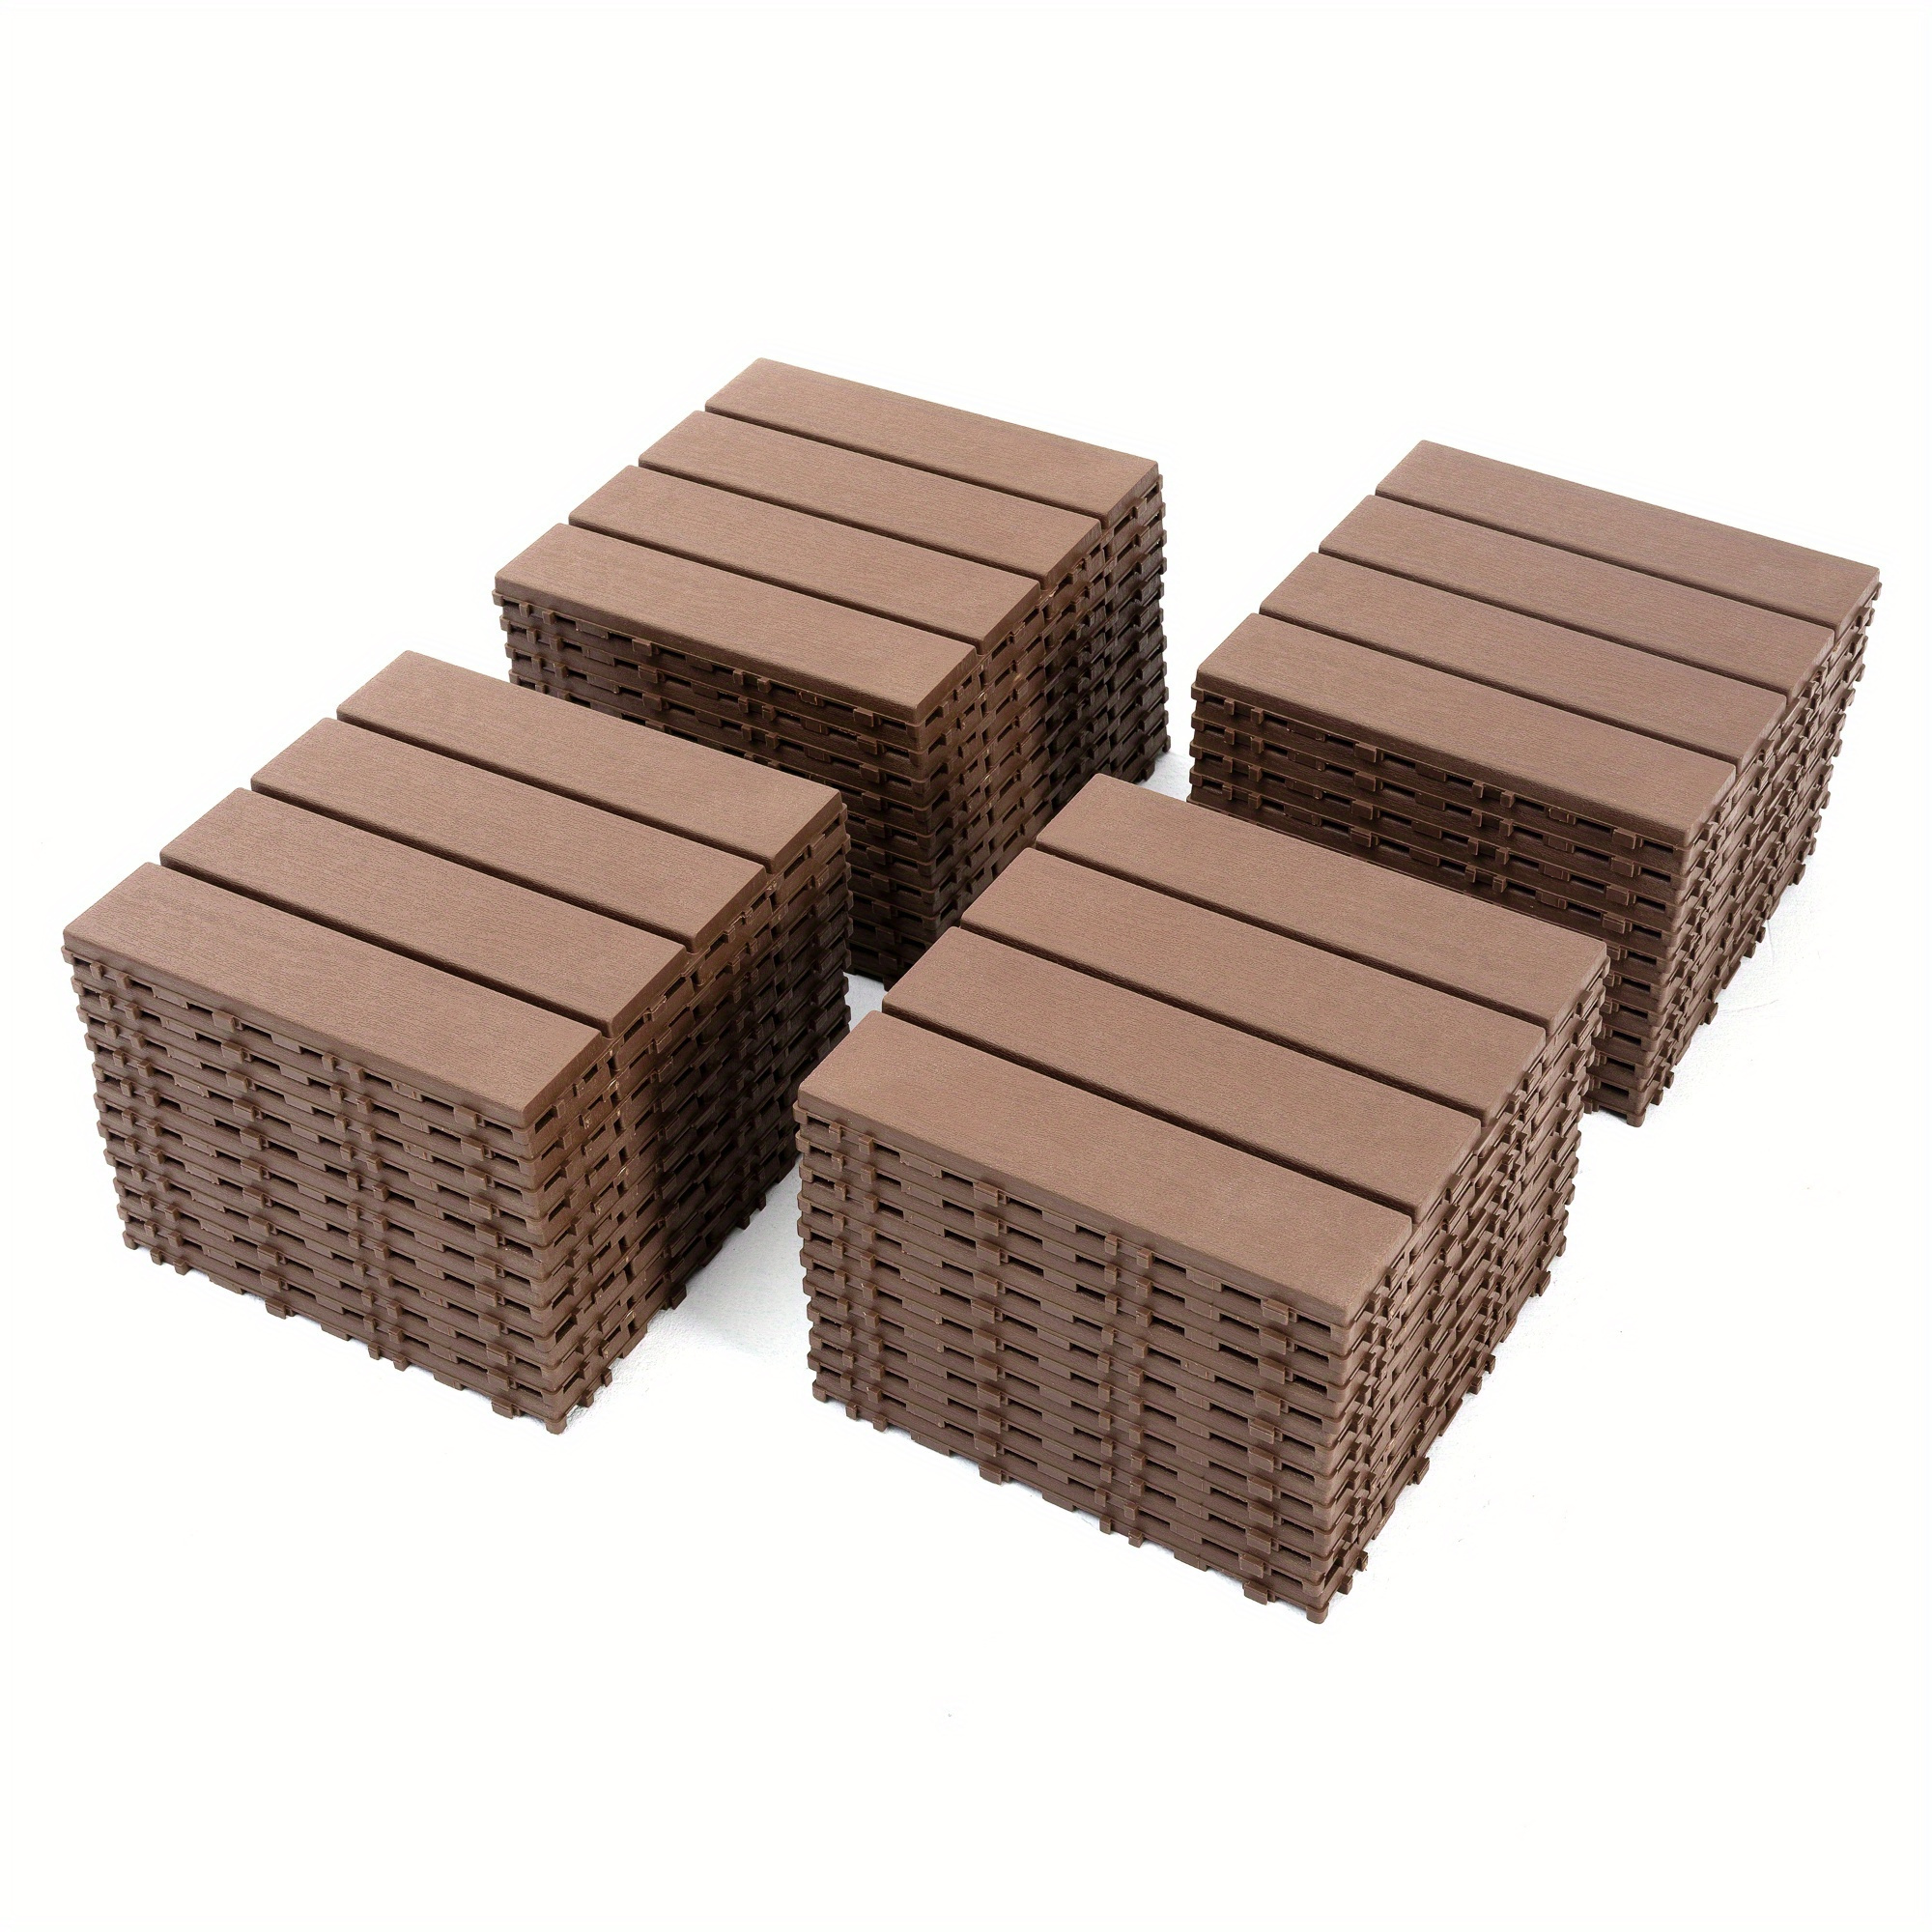 

Plastic Interlocking Deck Tiles, 88pack Patio Deck Tiles, 12"x12" Square Waterproof Outdoor All Weather Use, Patio Decking Tiles For Poolside Balcony Backyard, Brown/gray